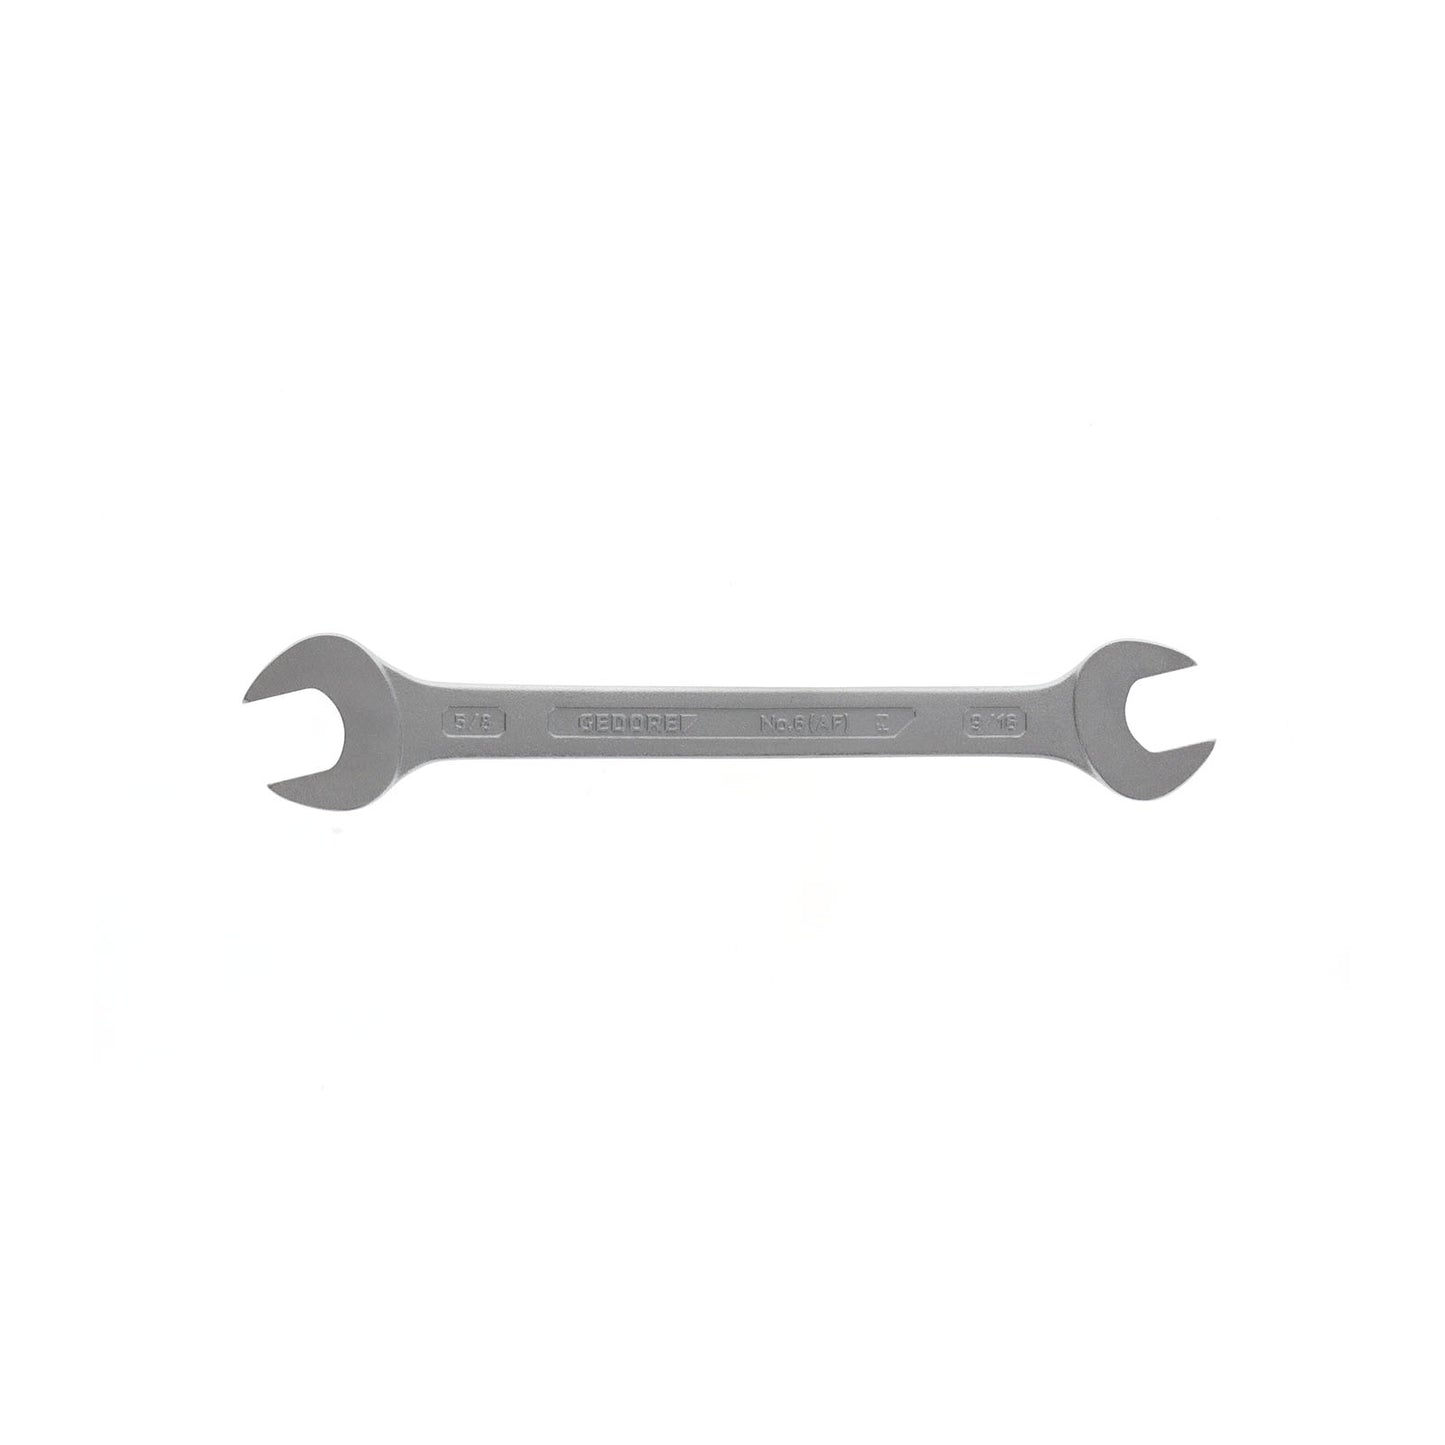 GEDORE 6 9/16X5/8AF - 2-Mount Fixed Wrench, 9/16x5/8AF (6070530)